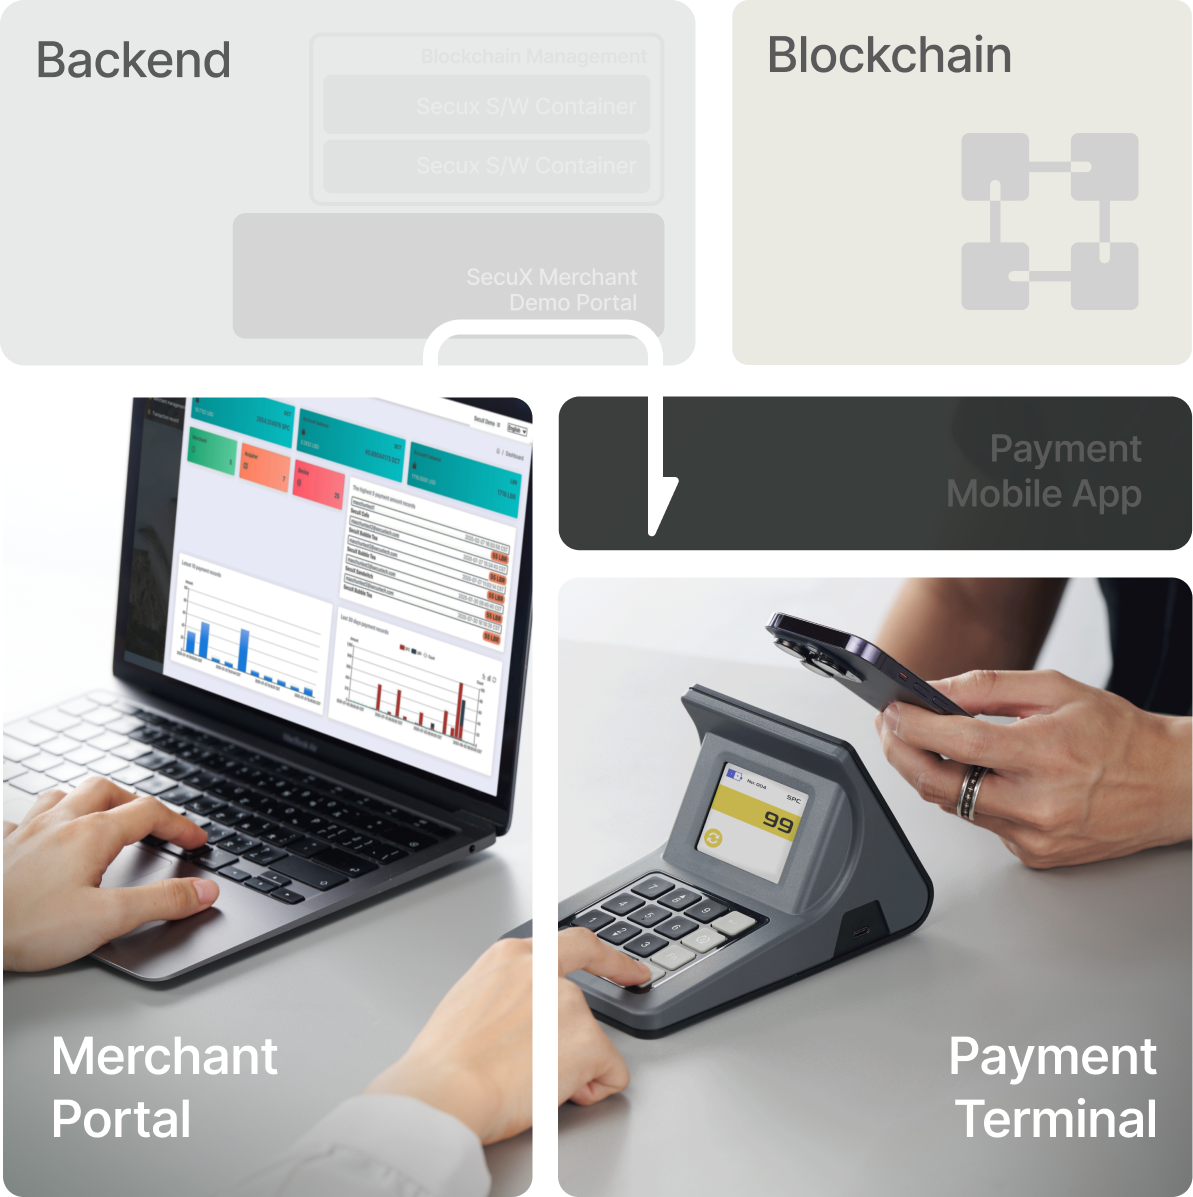 Merchant owner can check and manage payment data from merchant portal or app